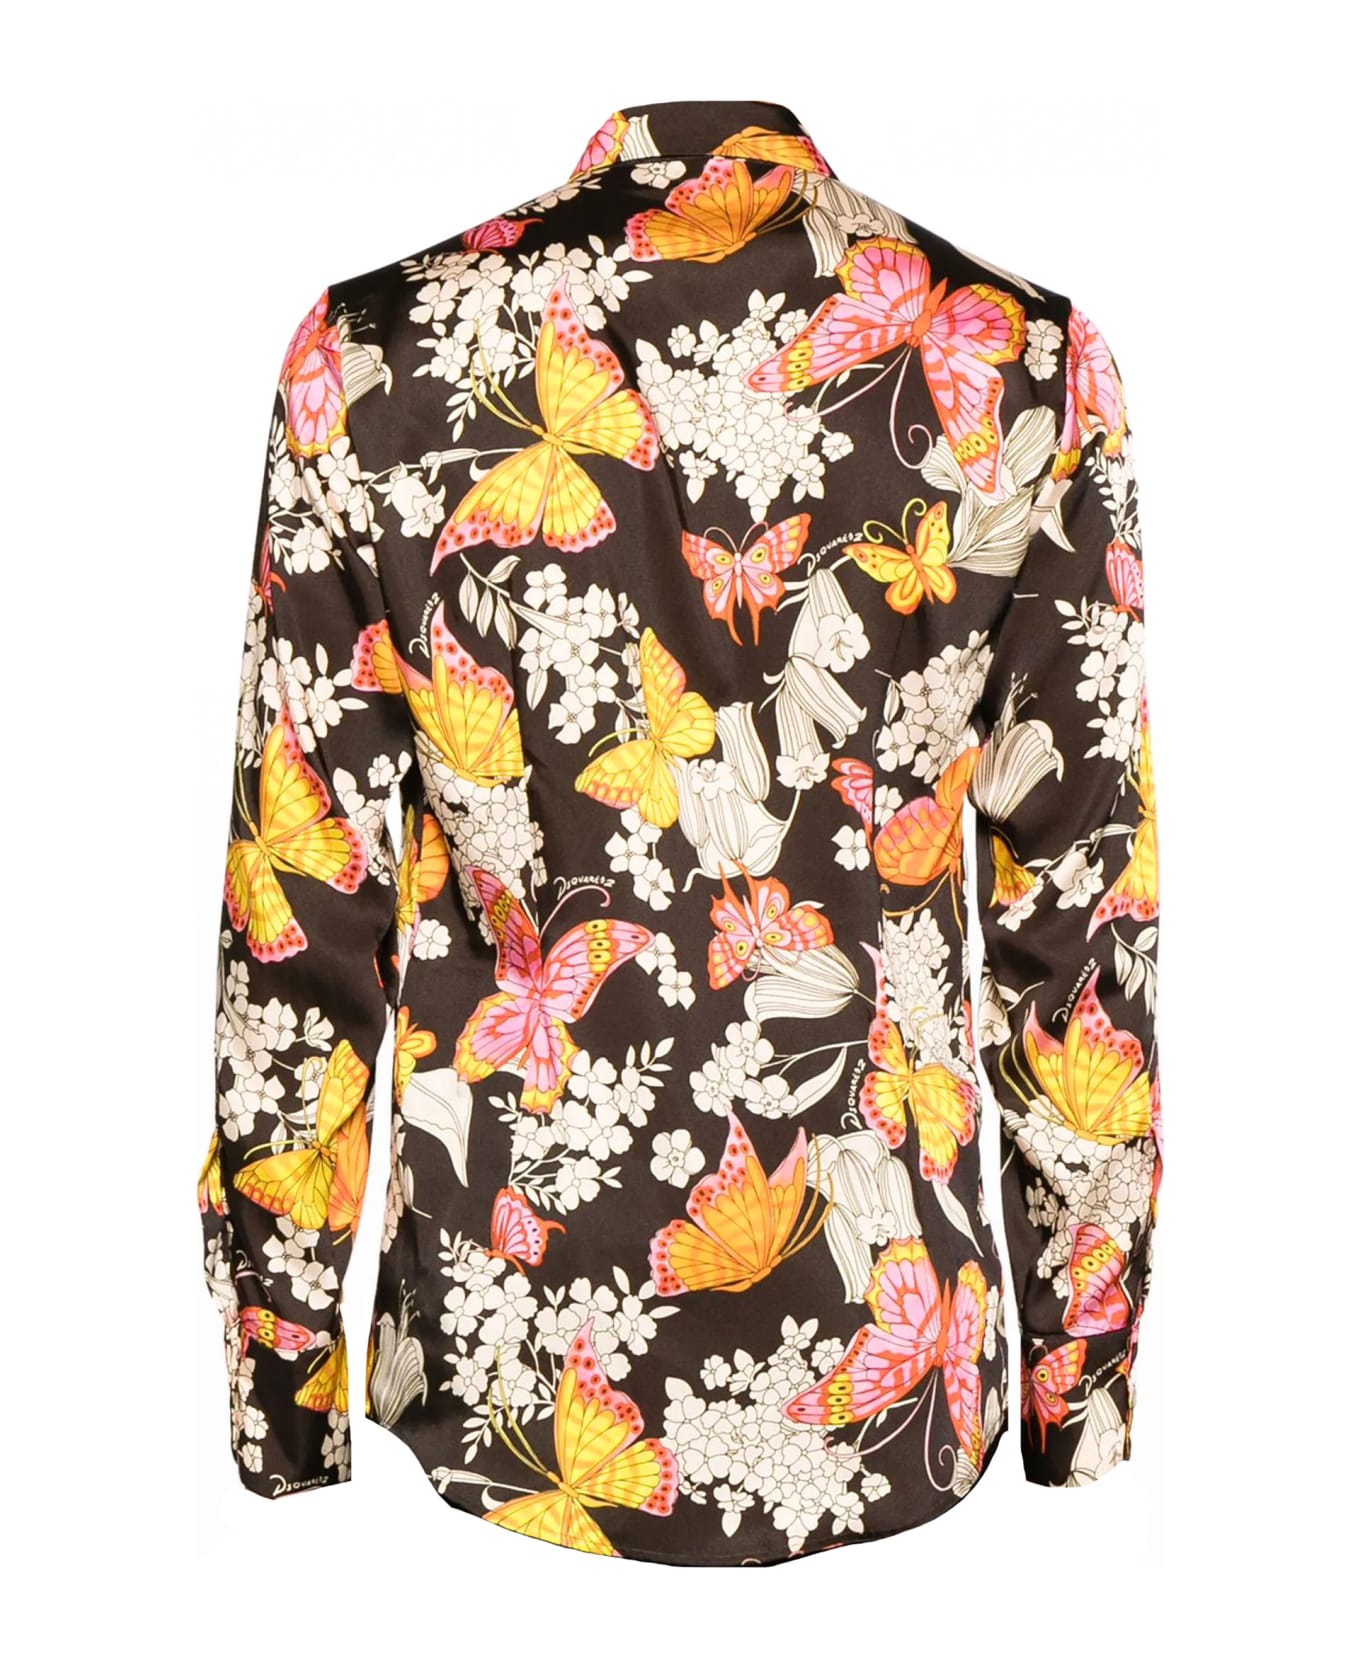 Dsquared2 Butterfly Print Shirt - Black/Mix Colours シャツ